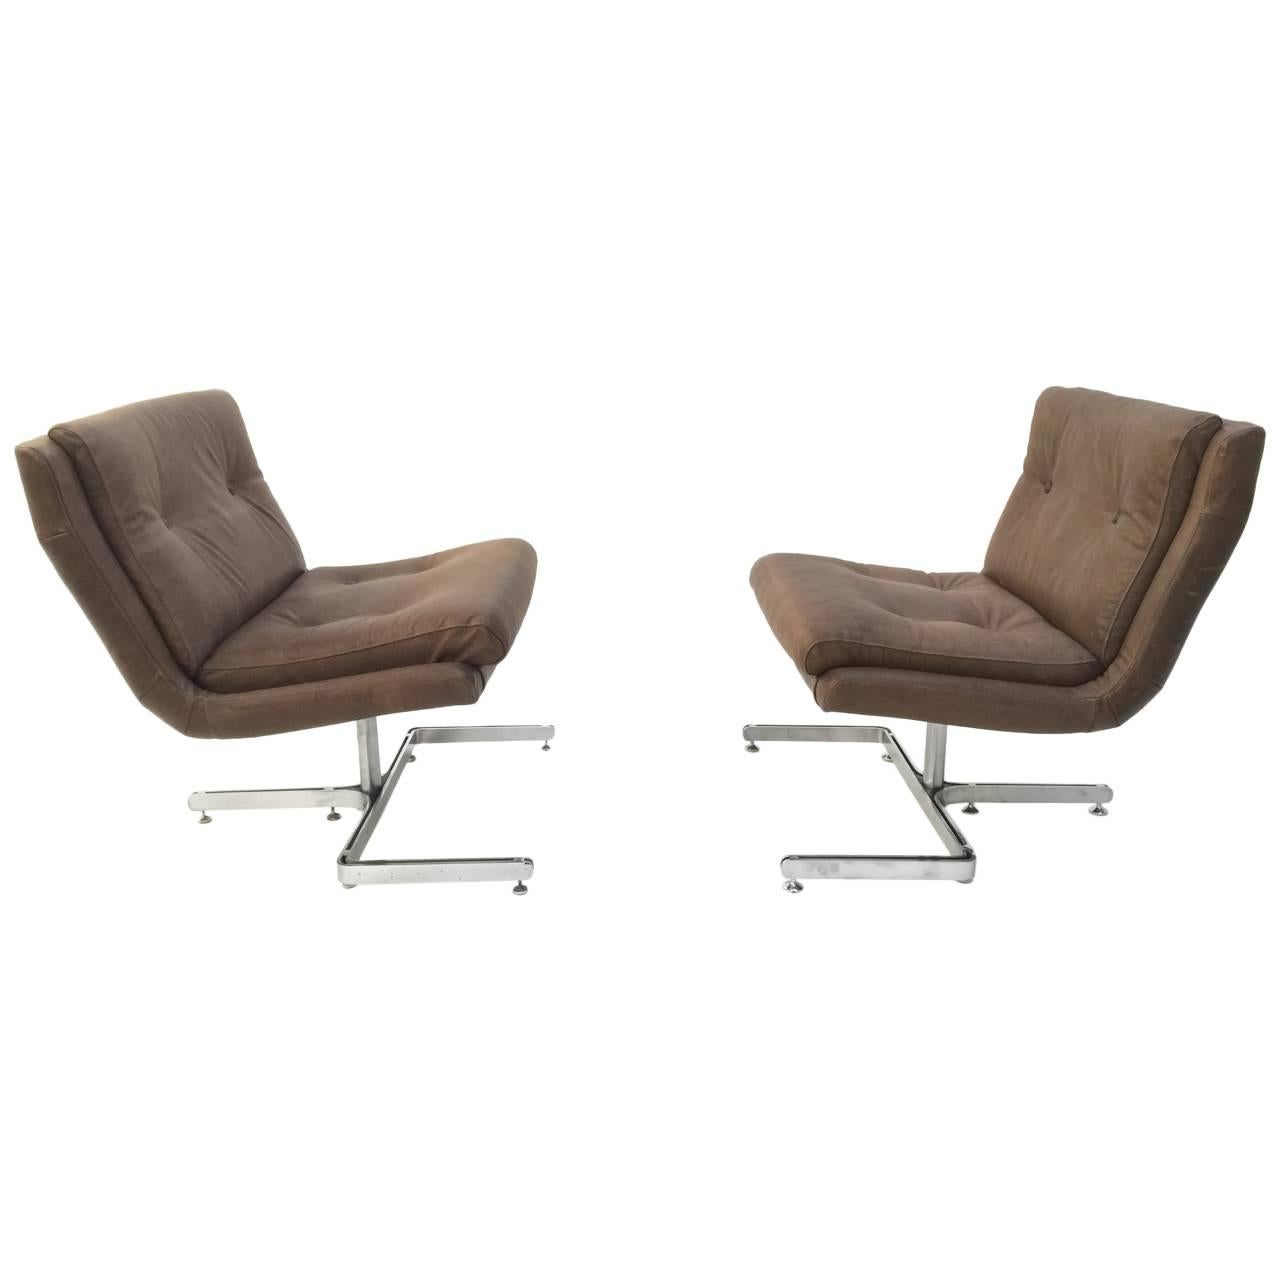 Pair of Restored, Leather Lounge Chairs by 'Raphael', 1973, France Published